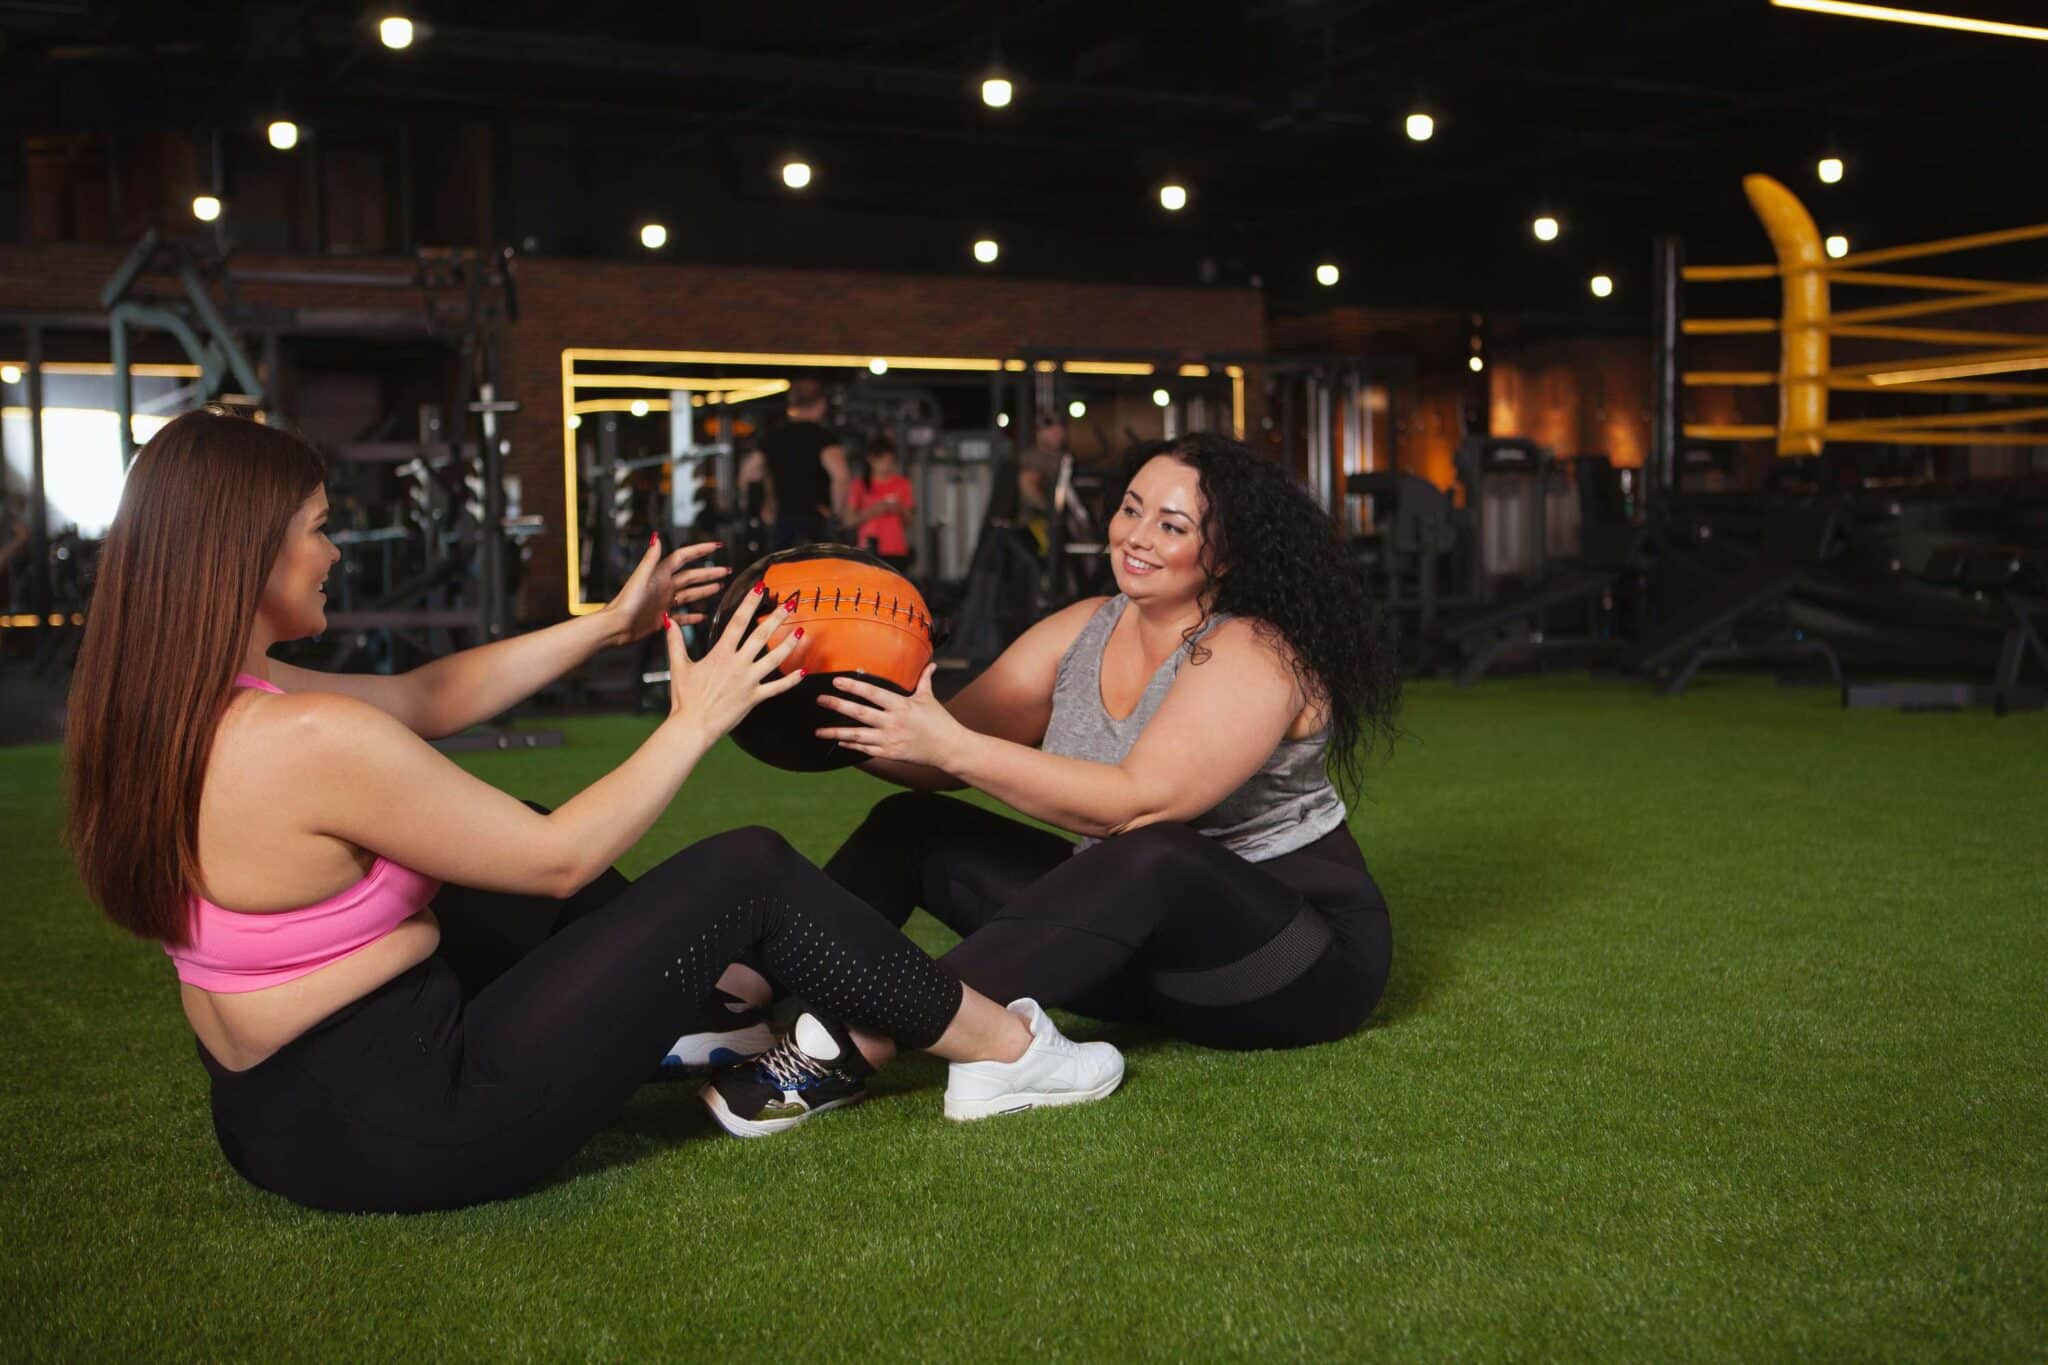 Women exercise together in the gym